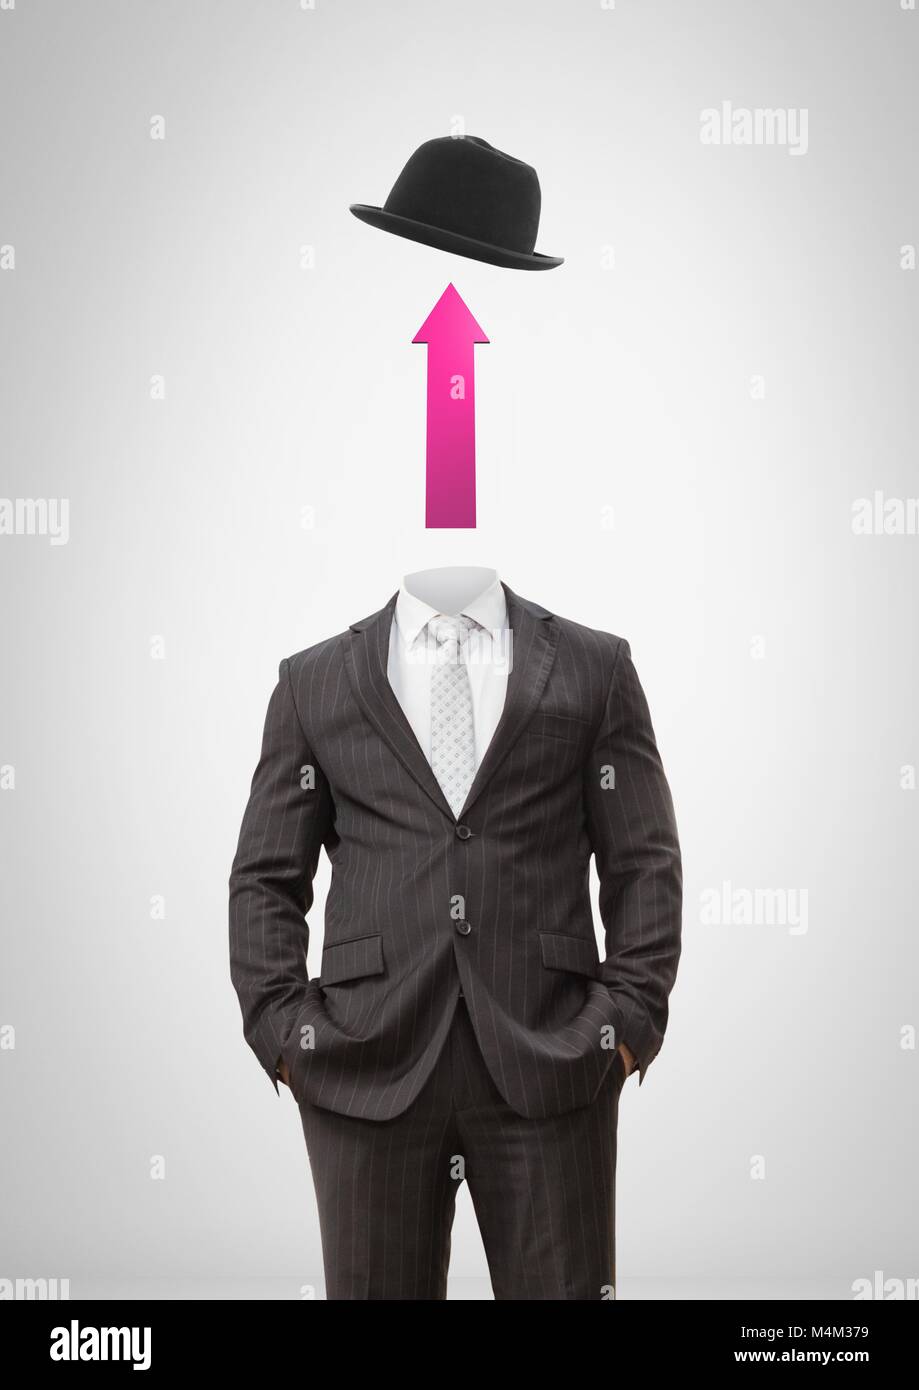 https://c8.alamy.com/comp/M4M379/headless-man-with-surreal-floating-hat-and-up-arrow-M4M379.jpg